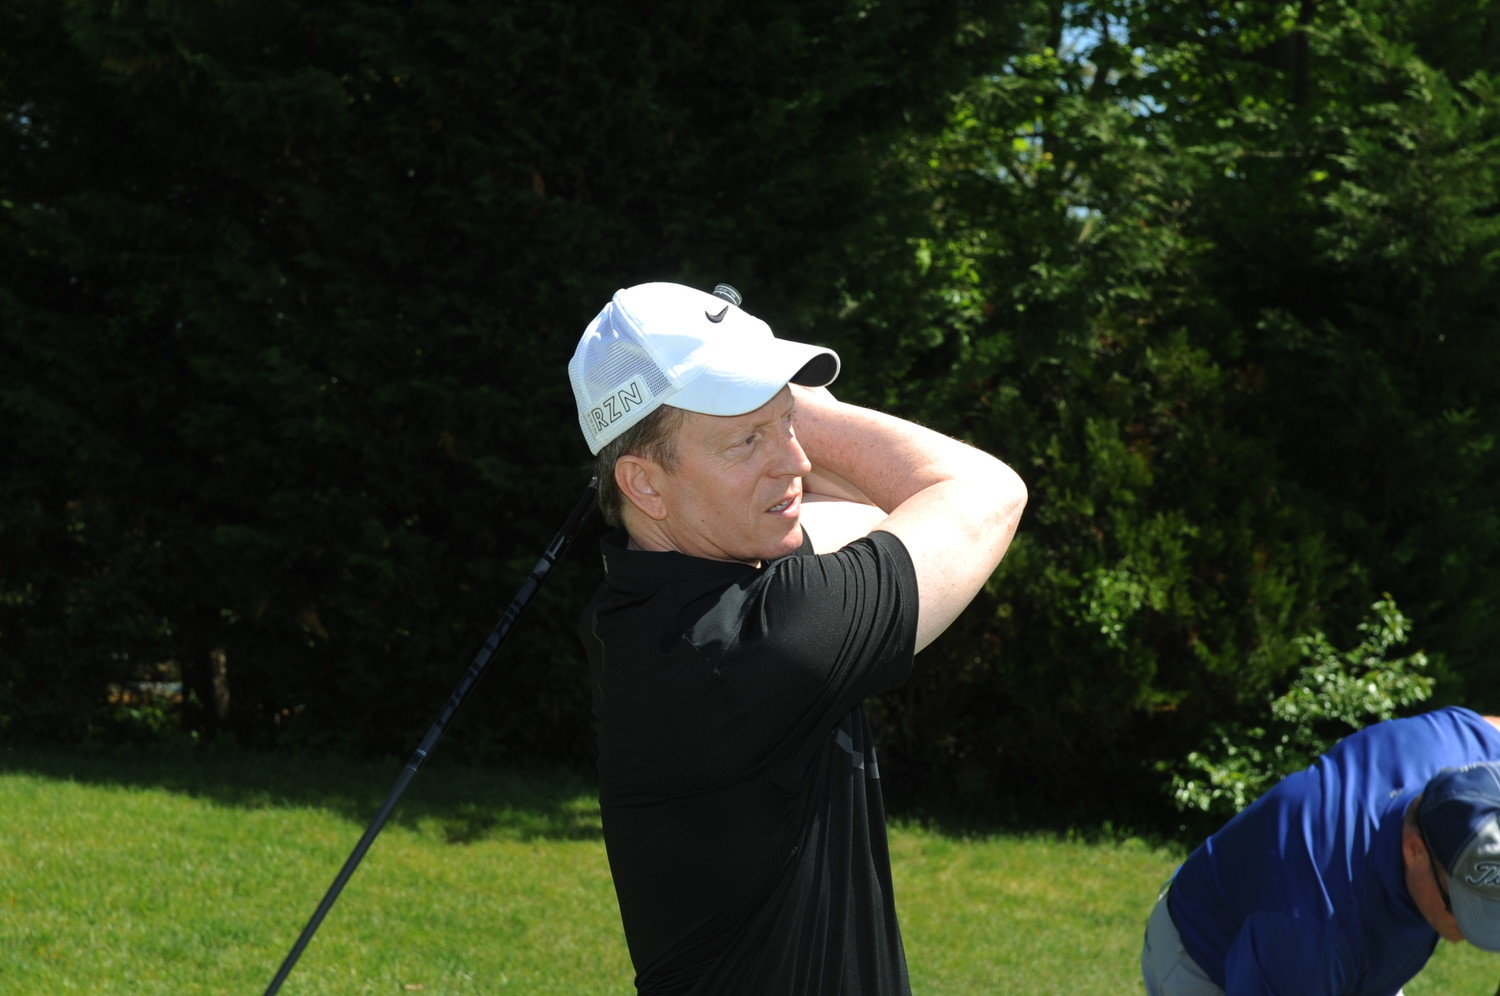 Mount Sinai South Nassau hospital has postponed its annual golf outing to Sept. 14. In 2018, board member Lowell Frey followed the flight of his shot at the event.